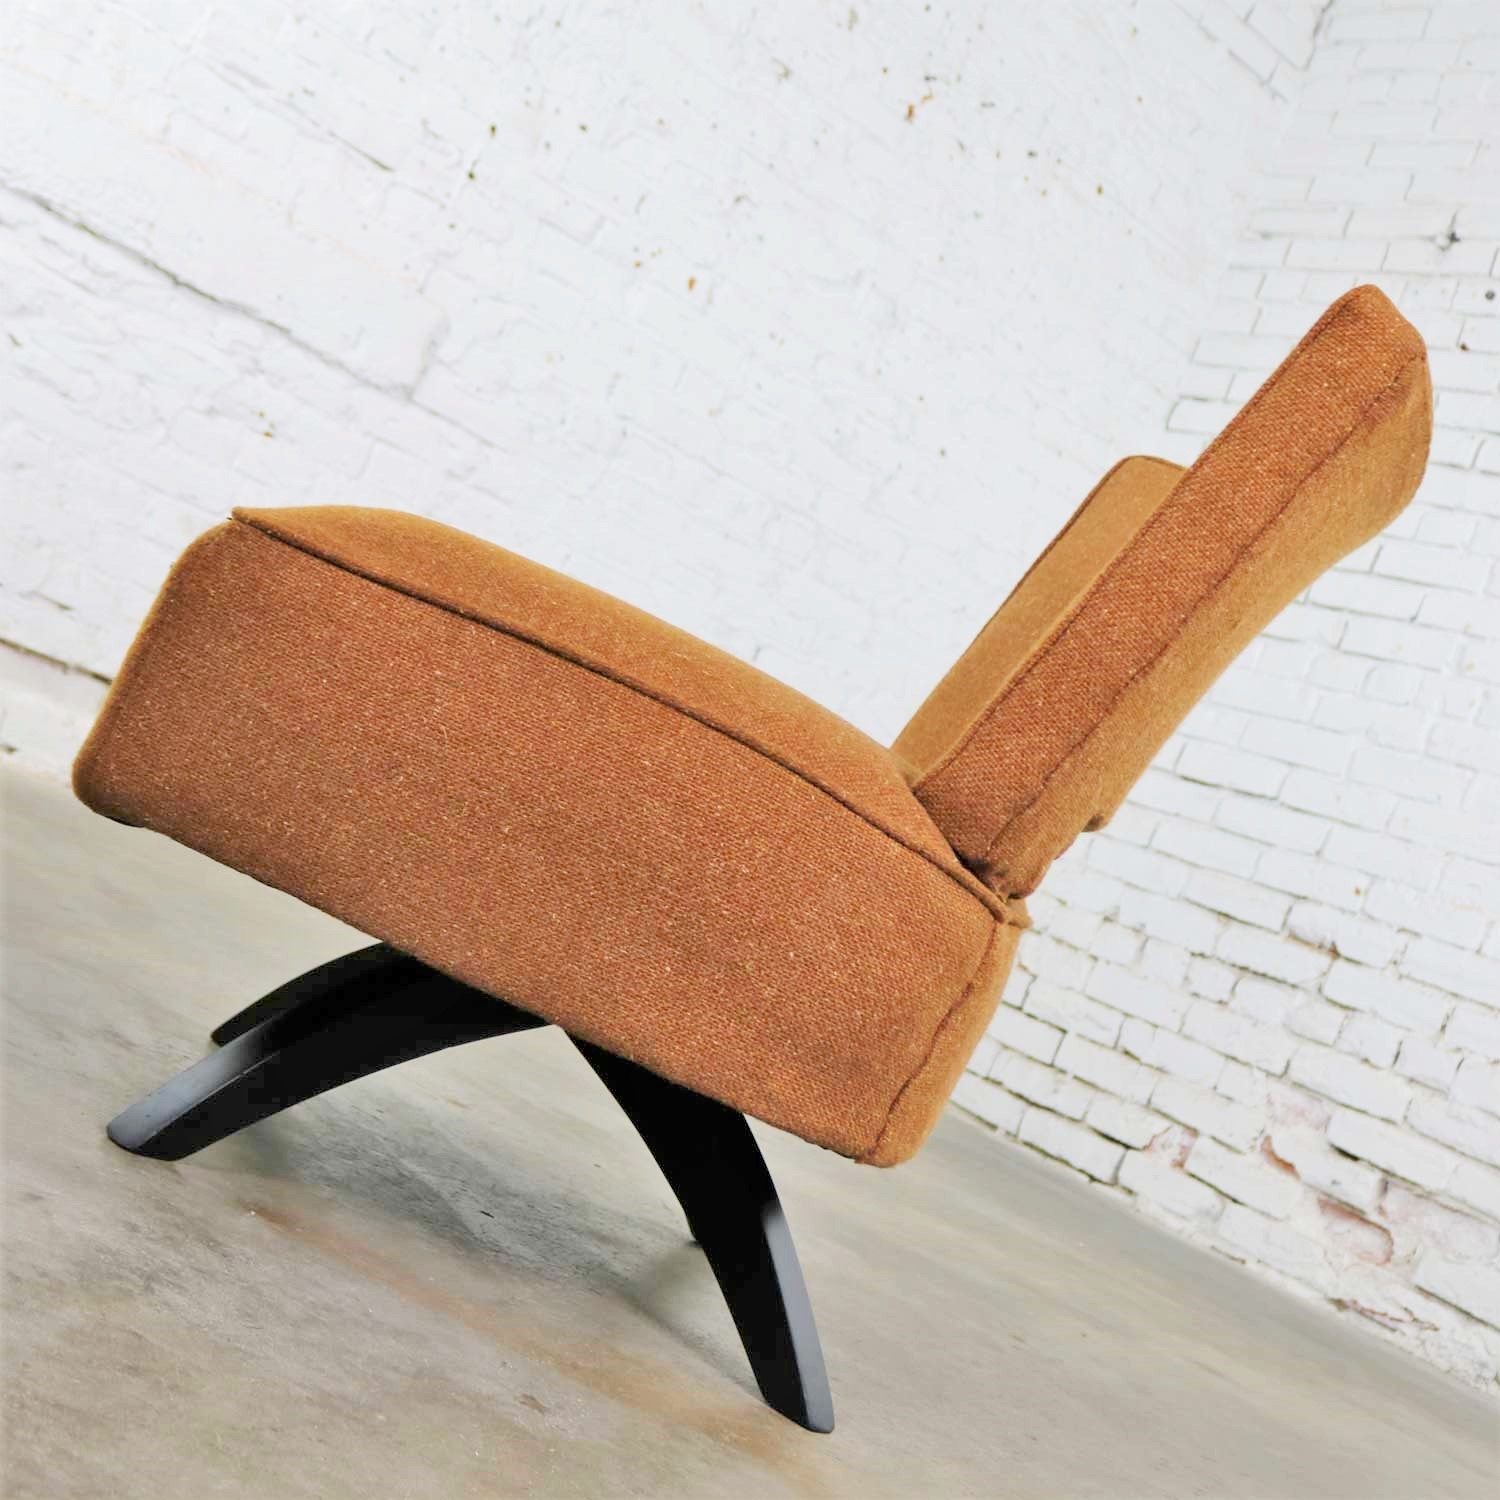 Mid Century Modern Swivel Slipper Chair Attributed to Kroehler Manufacturing